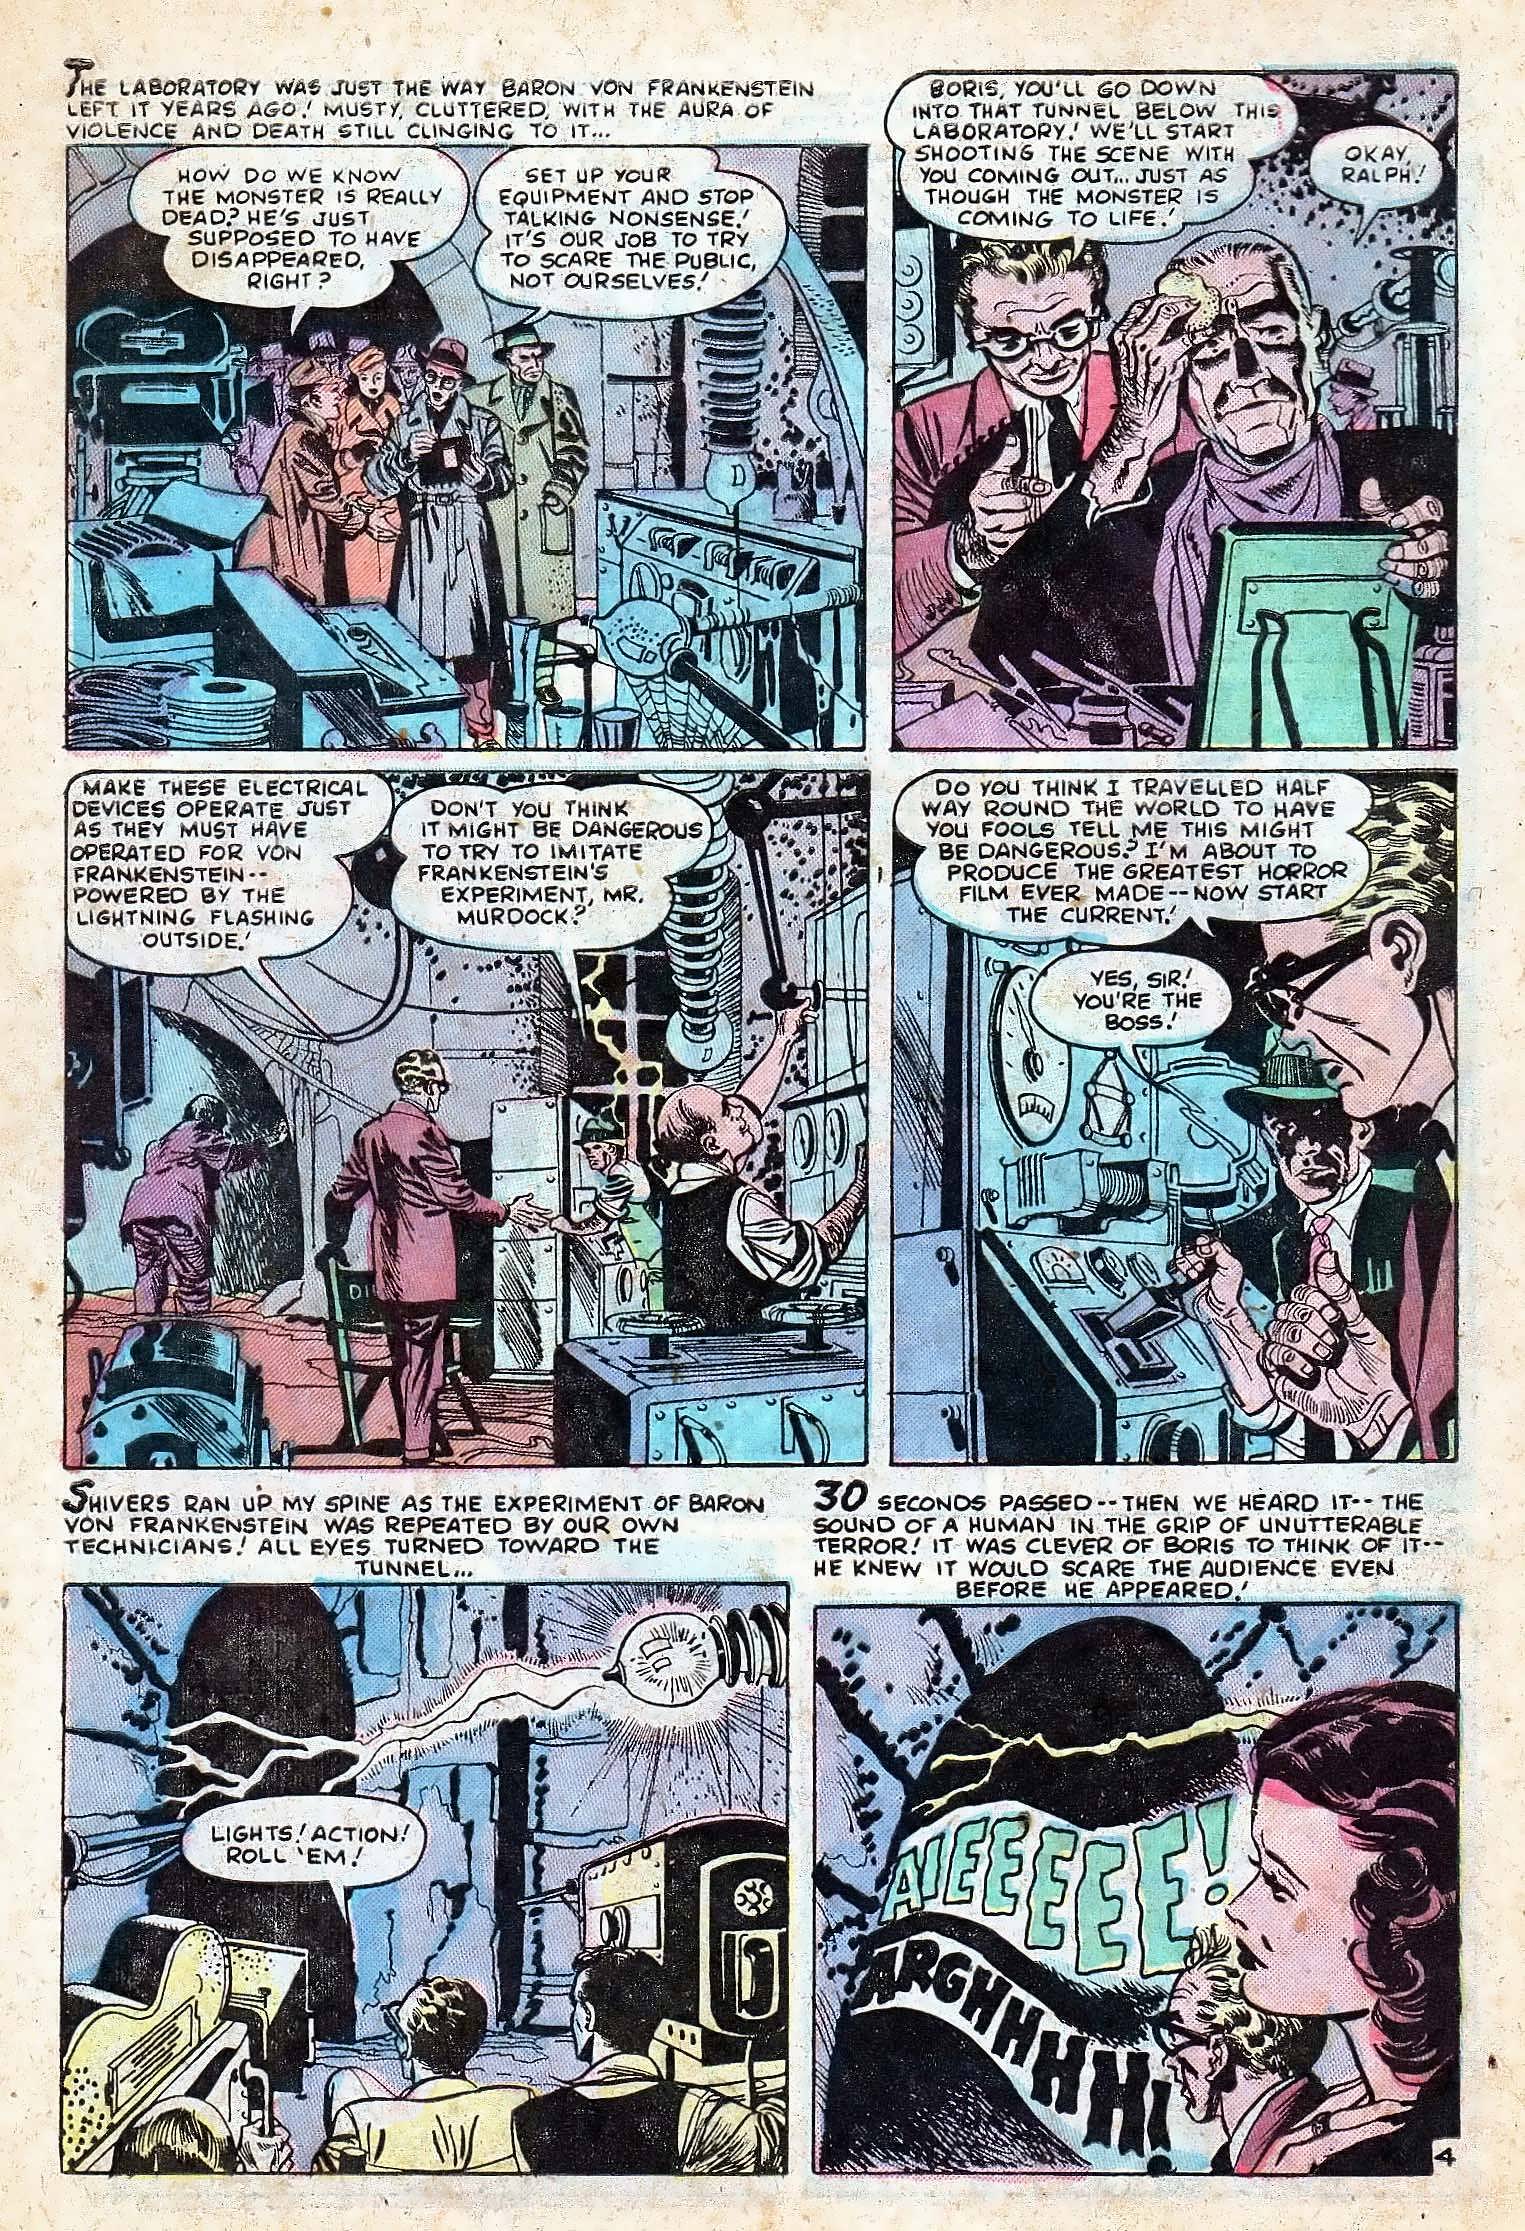 Marvel Tales (1949) 106 Page 5